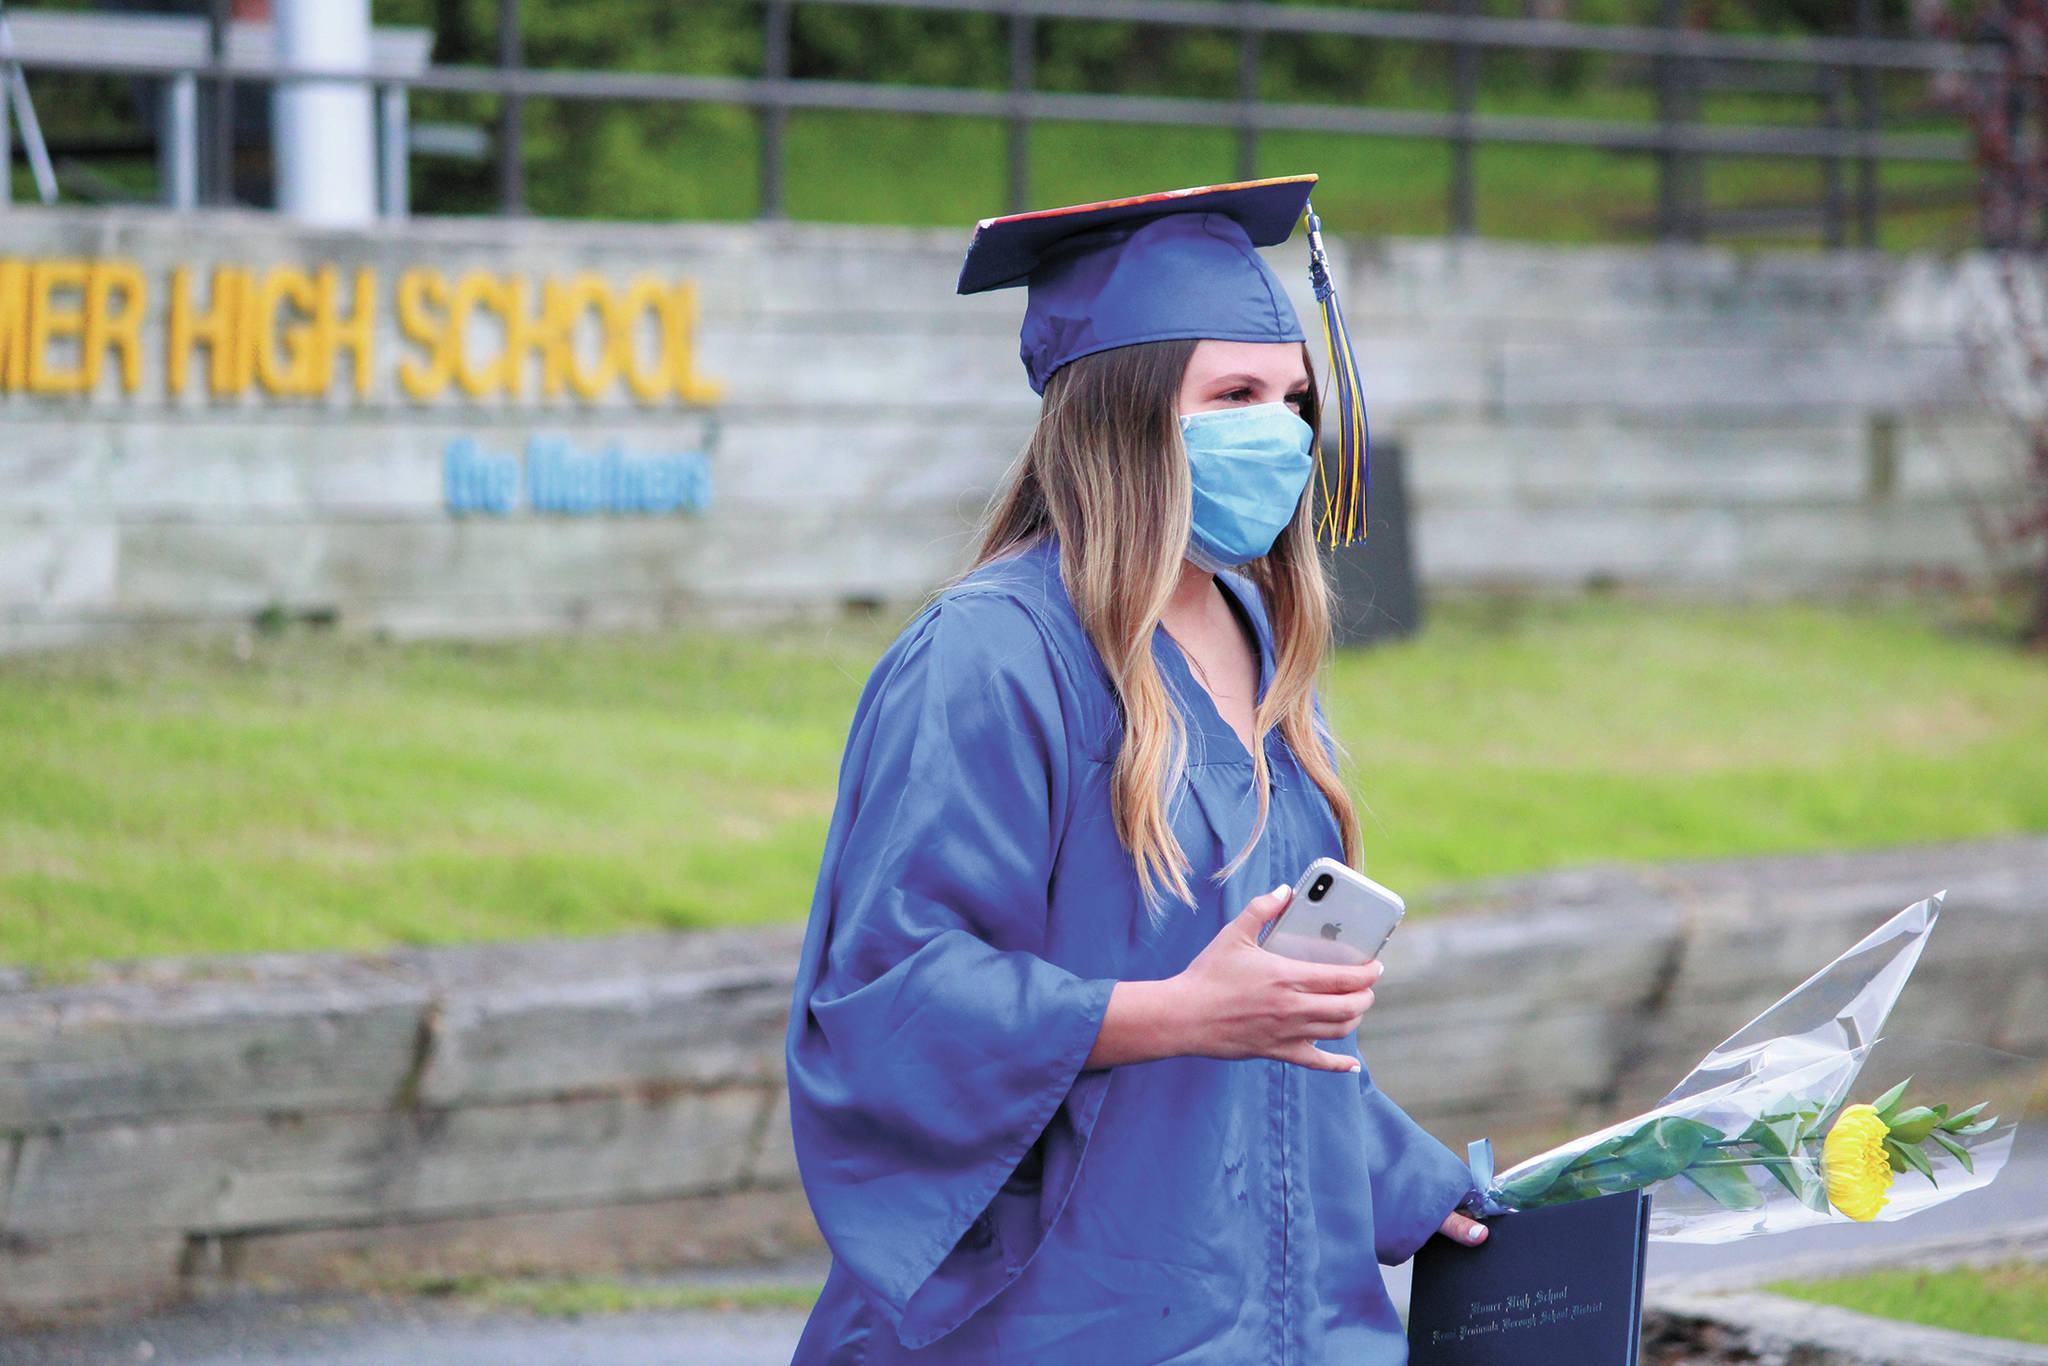 They’re done: Homer High School graduates walk outdoor stage